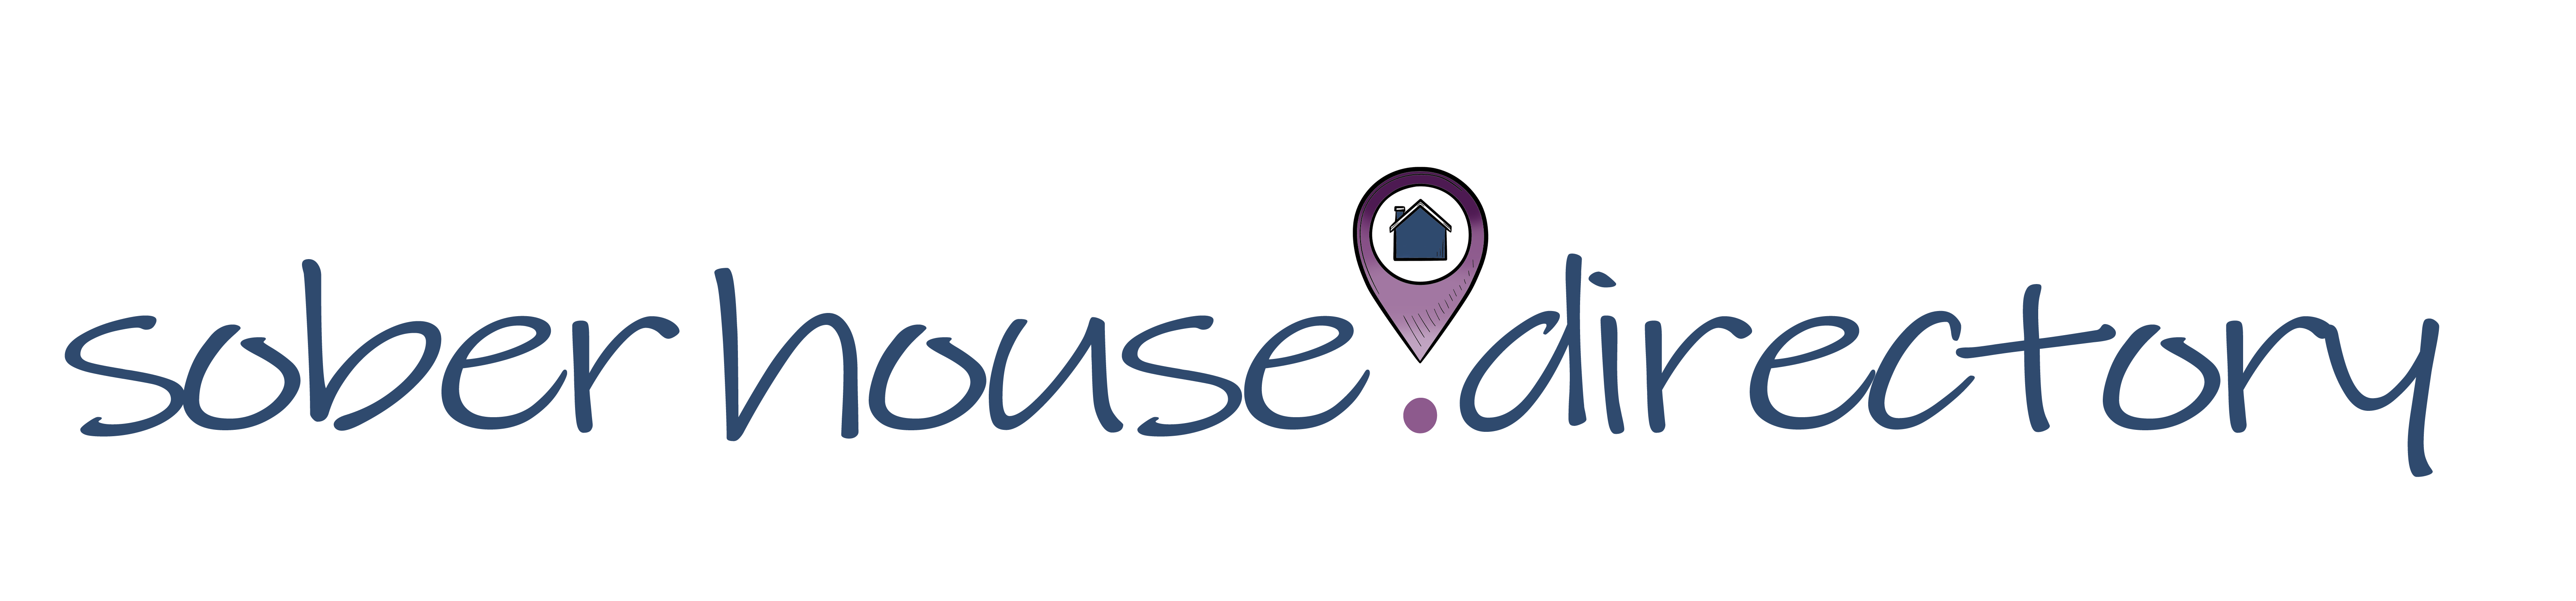 A Guide to the New Sober House Directory